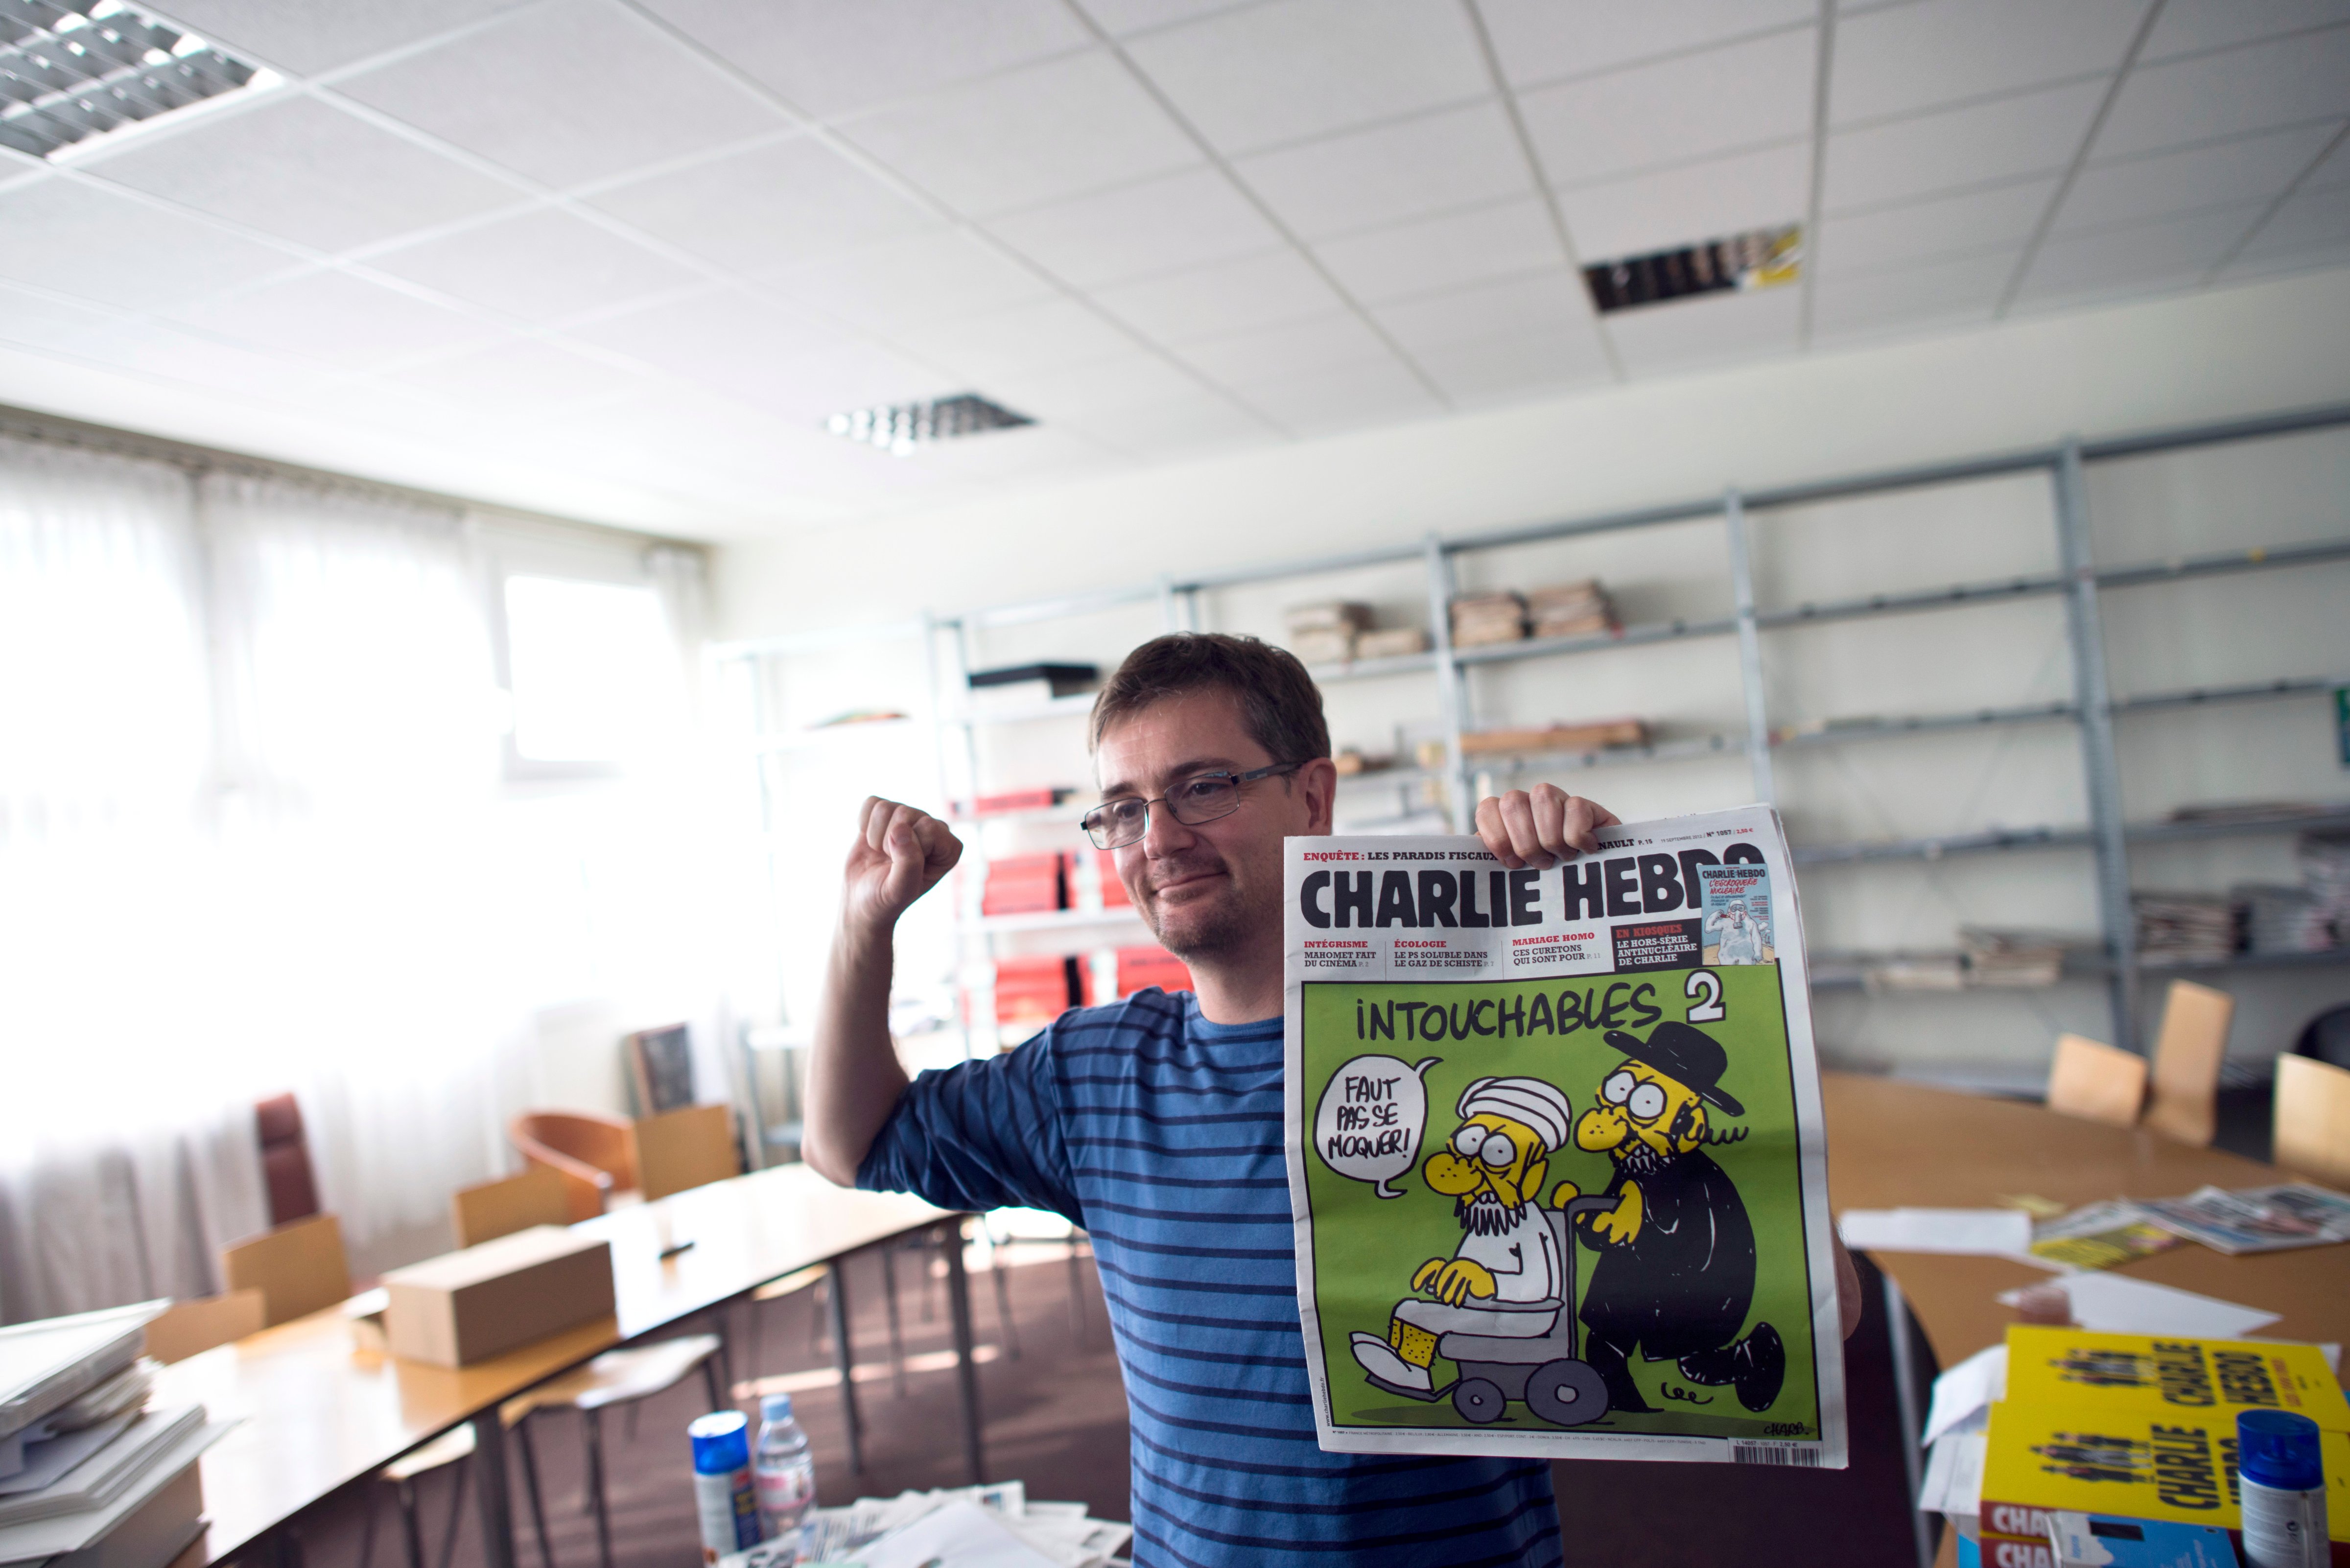 French satirical weekly <i>Charlie Hebdo</i>'s editor and cartoonist Stéphane Charbonnier clenches his fist as he presents to journalists, on Sept. 19, 2012, at the weekly's headquarters in Paris, the latest issue that features on the front cover a satirical drawing entitled 